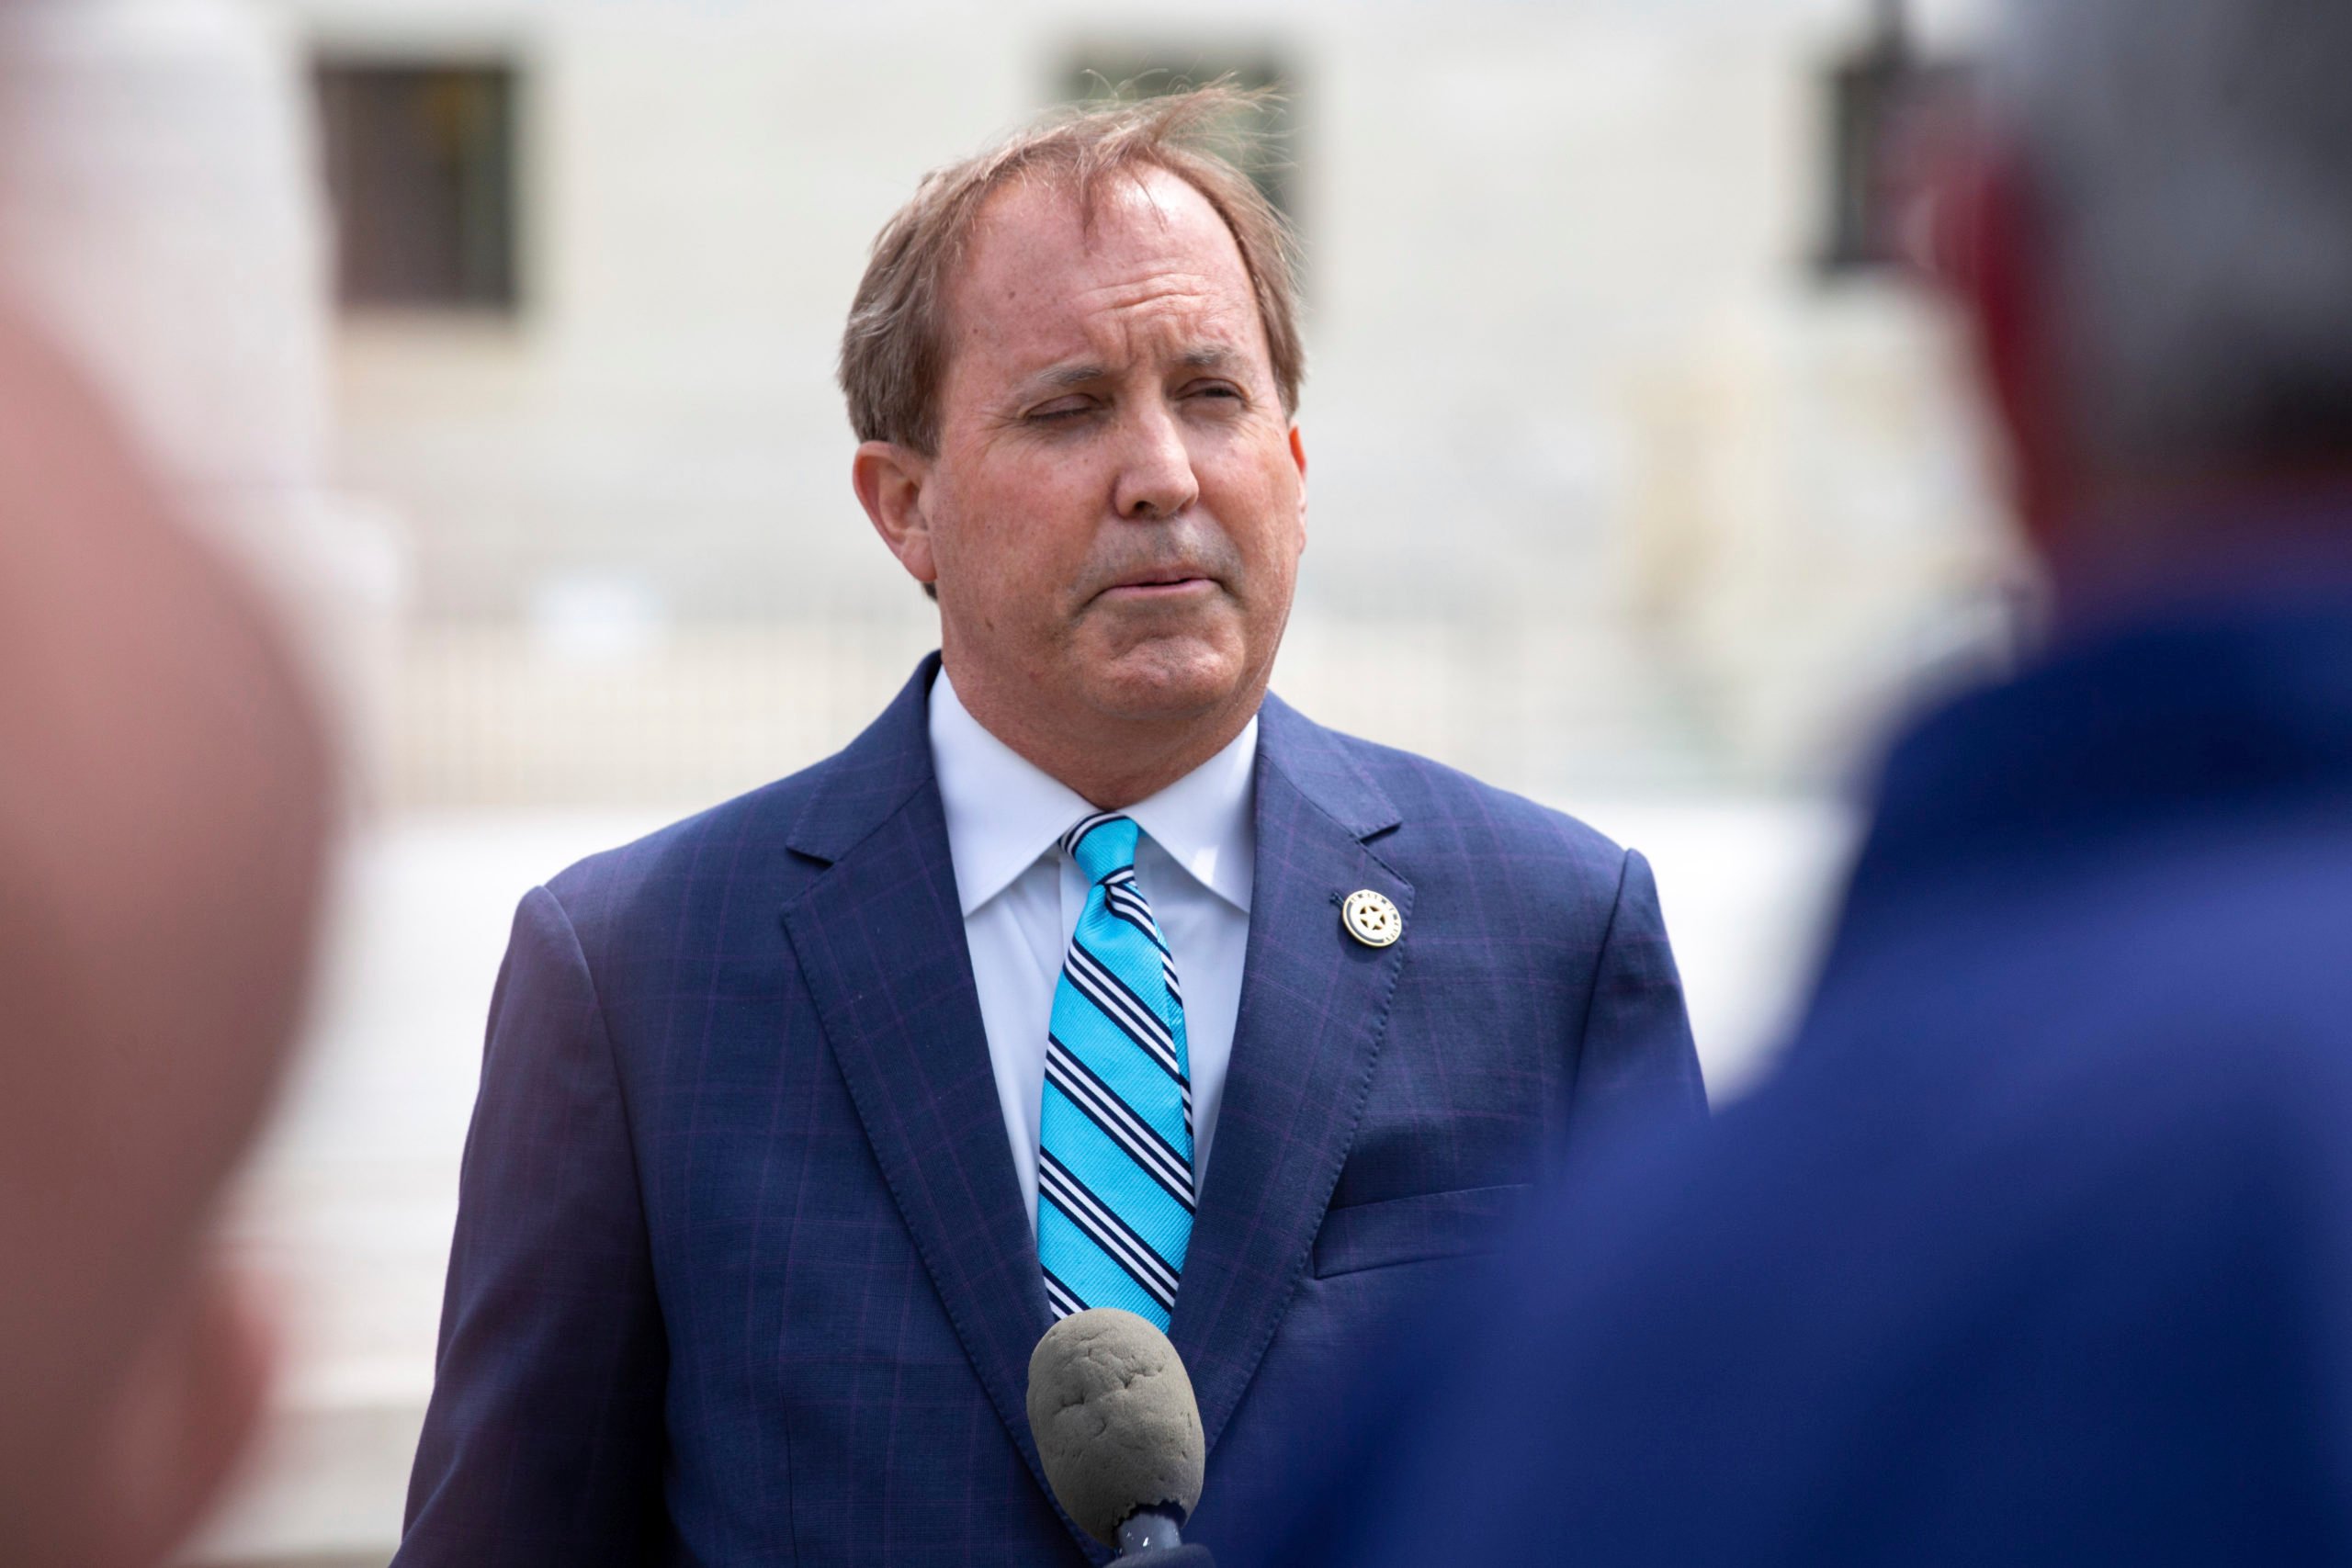 Texas Attorney General Ken Paxton speaks outside of the Supreme Court in Washington, D.C.